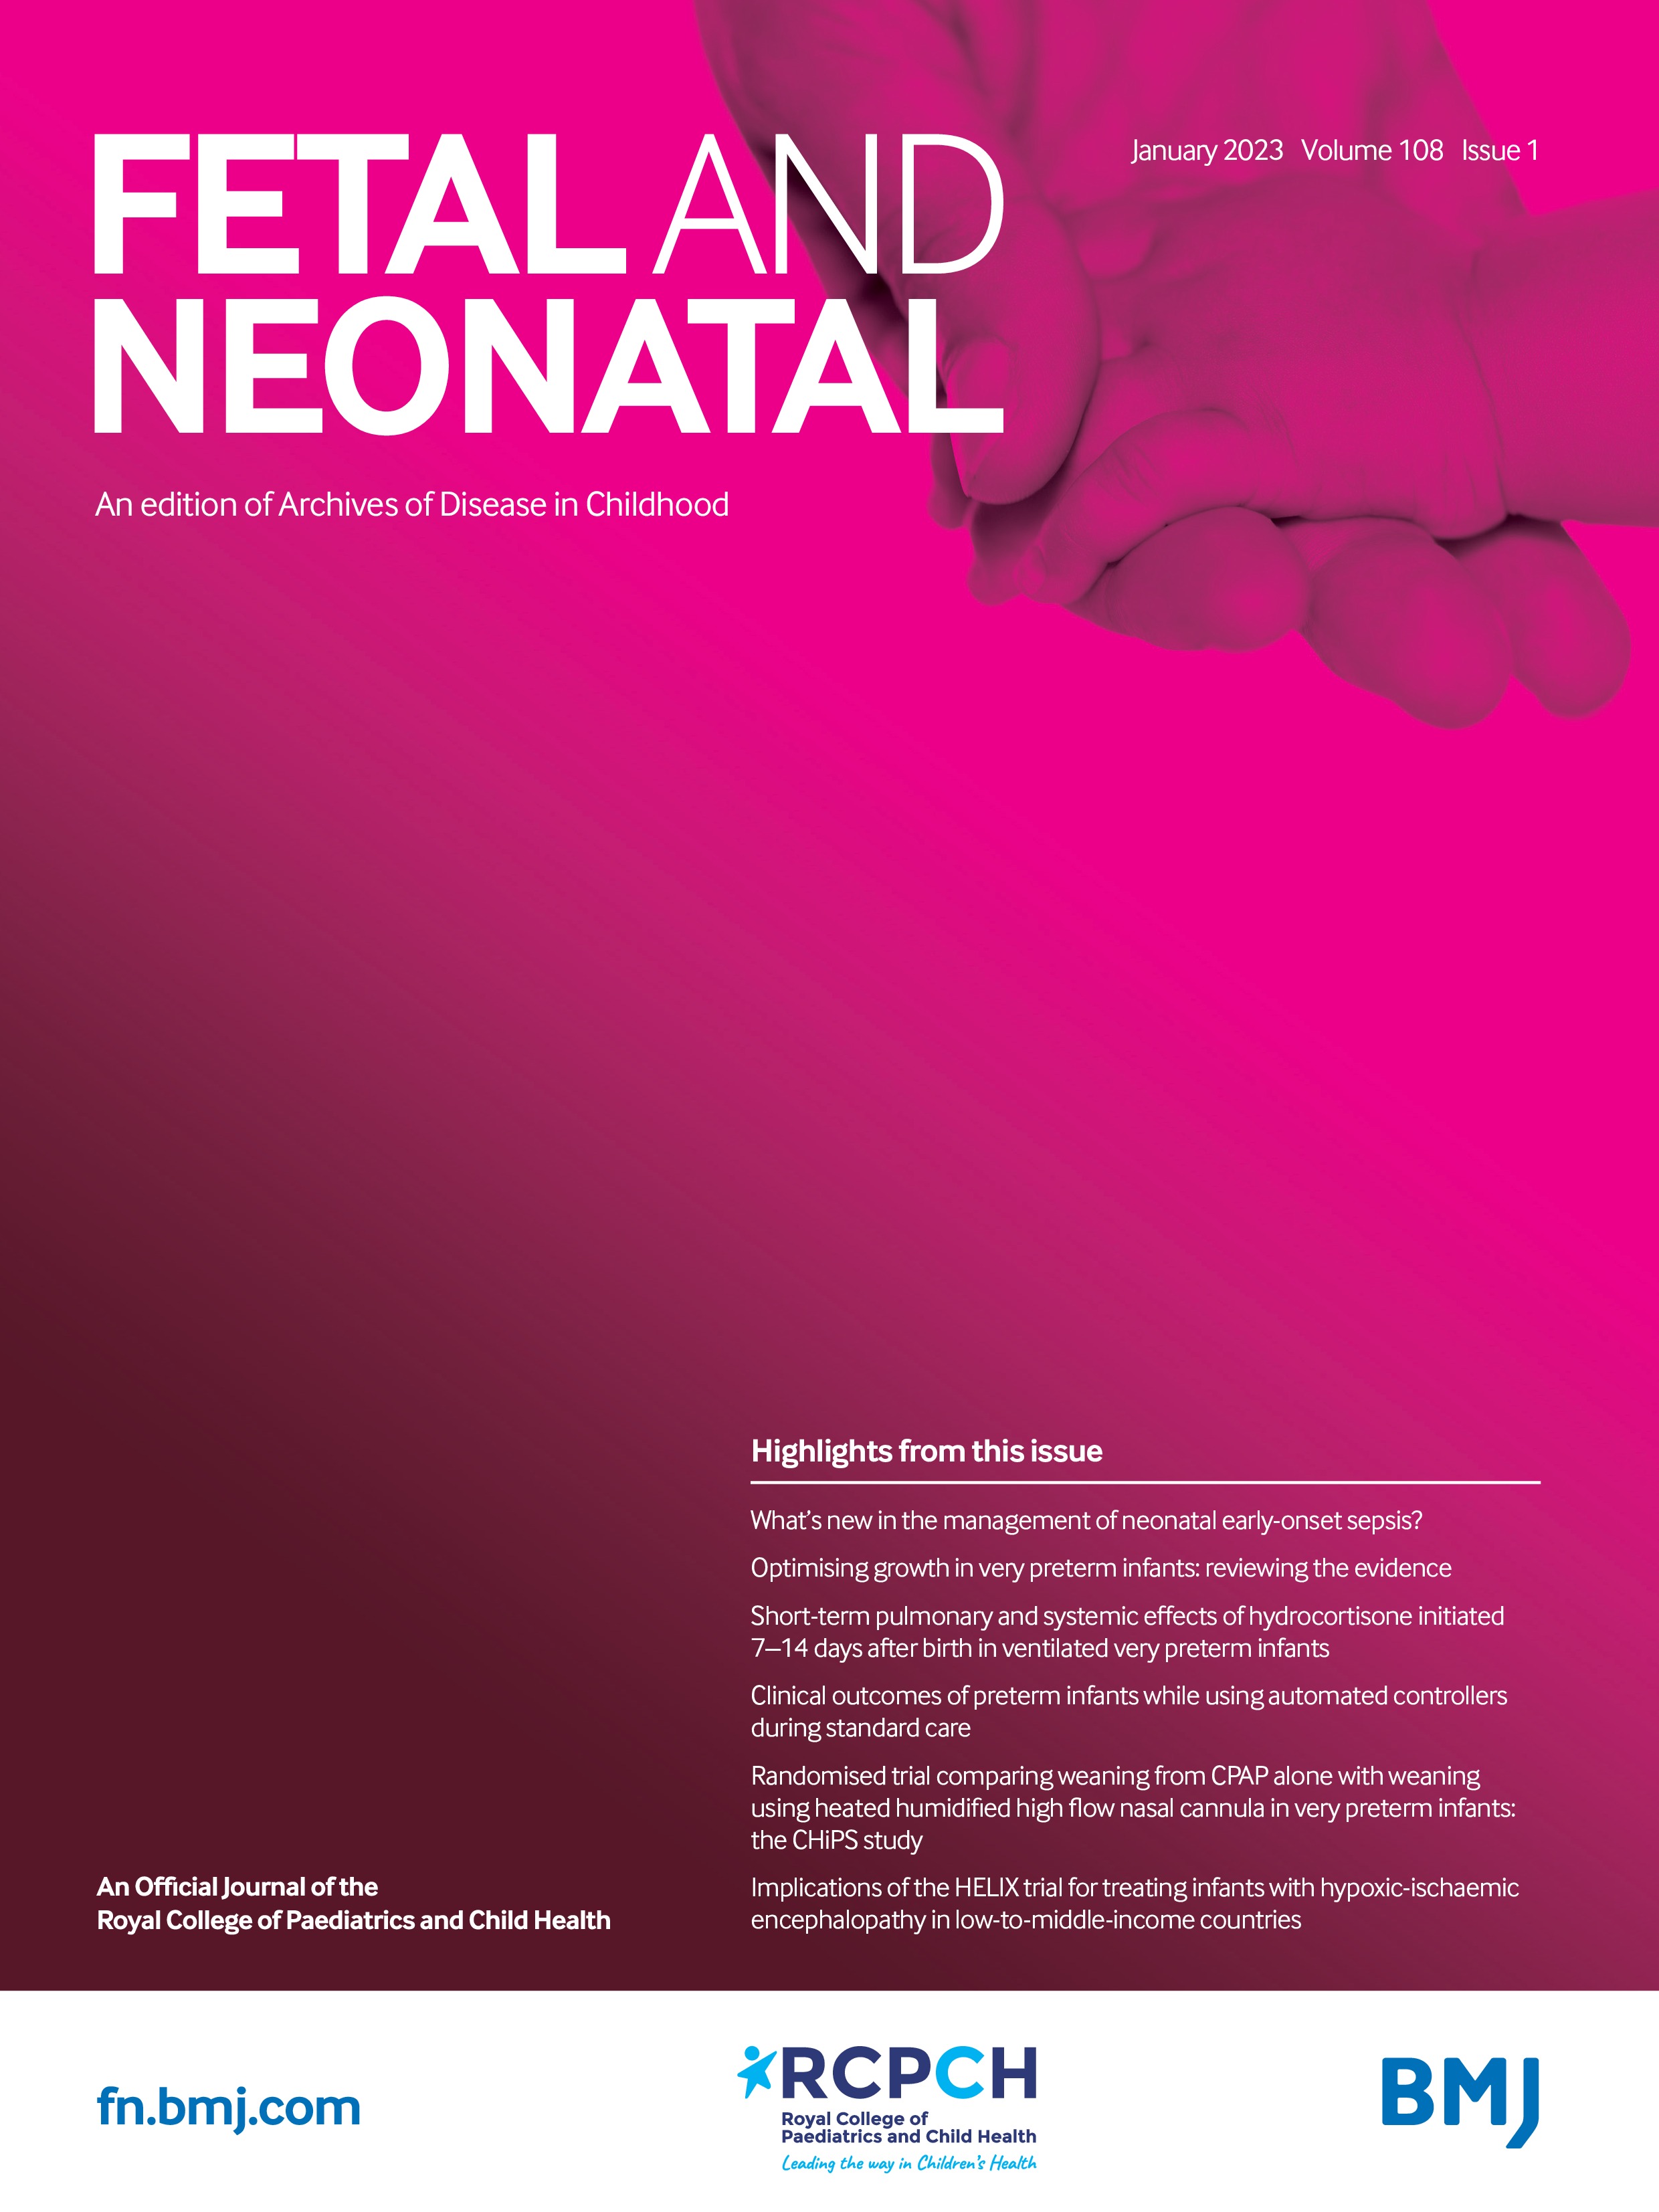 Implementing two-stage consent pathway in neonatal trials